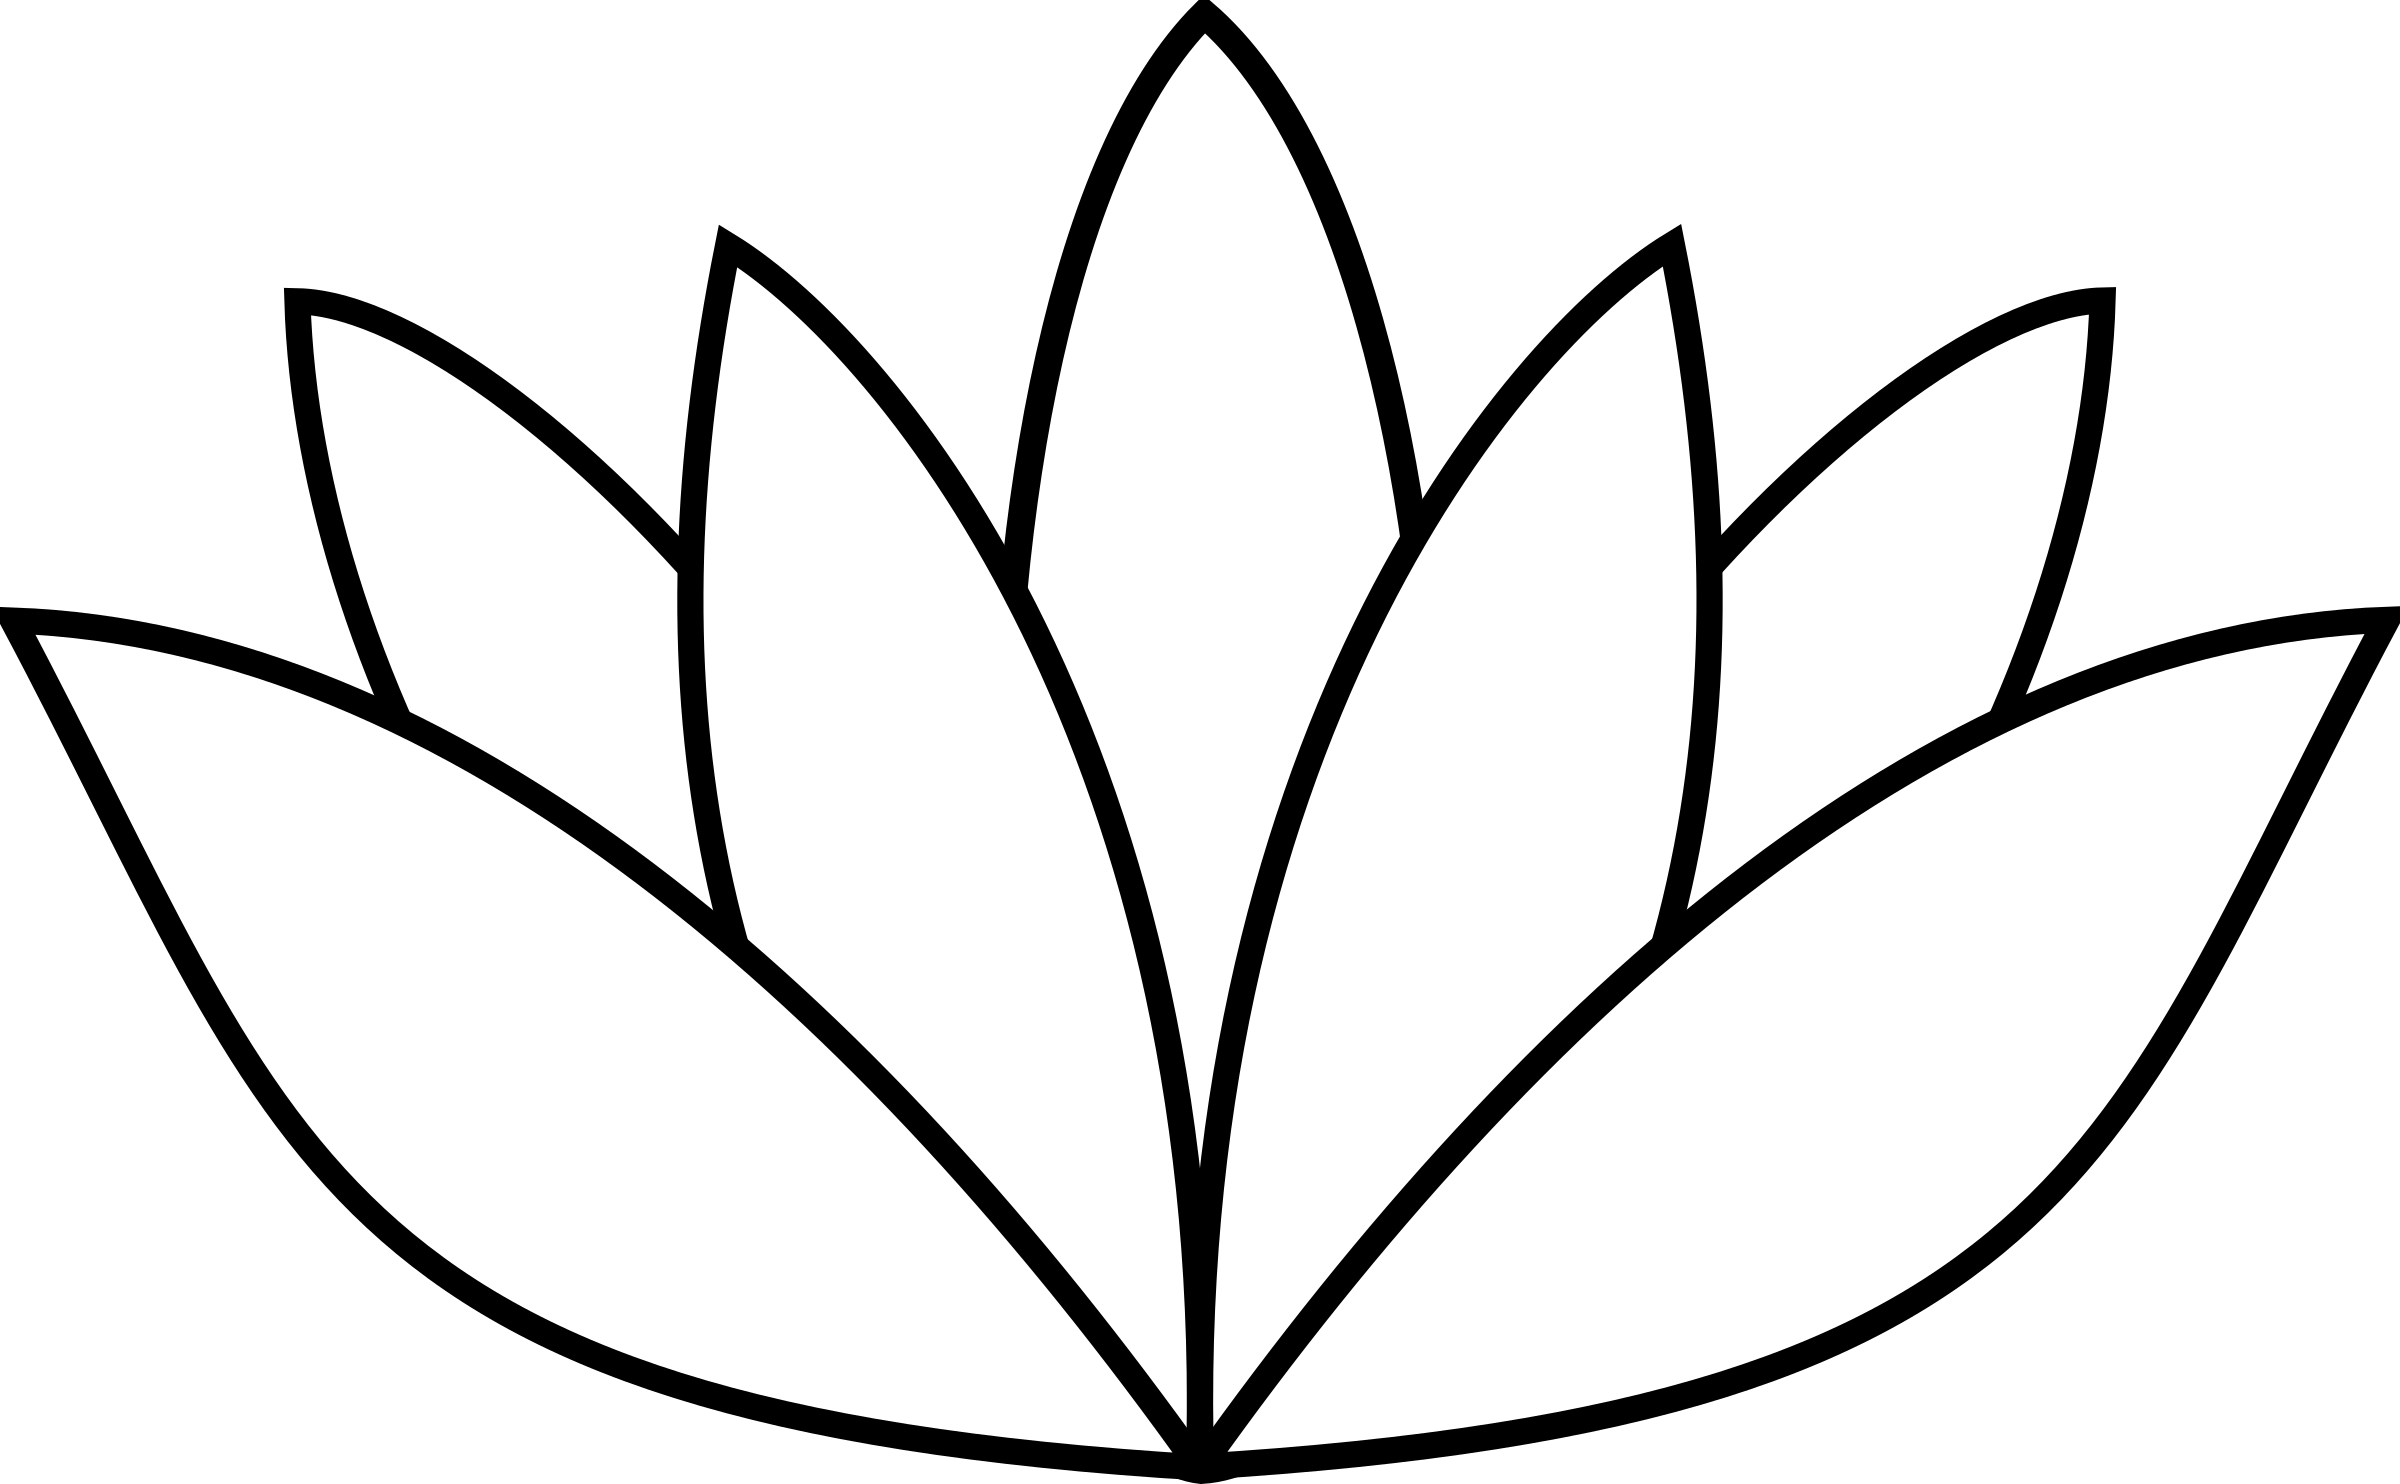 Big Image (Png) - Lotus Flower Black And White, Transparent background PNG HD thumbnail